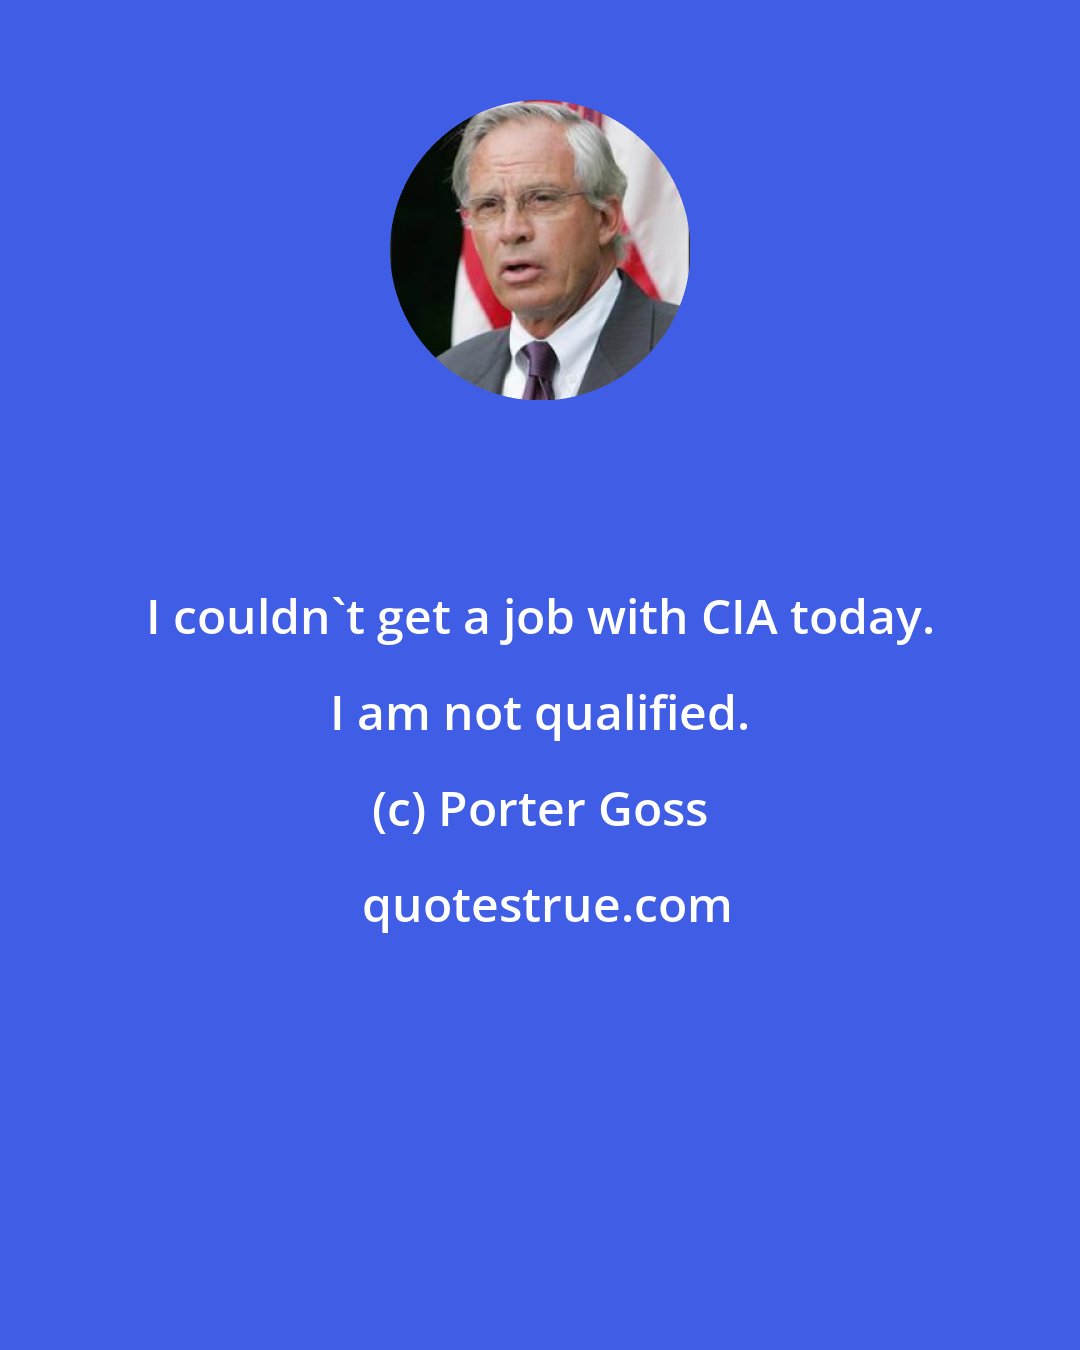 Porter Goss: I couldn't get a job with CIA today. I am not qualified.